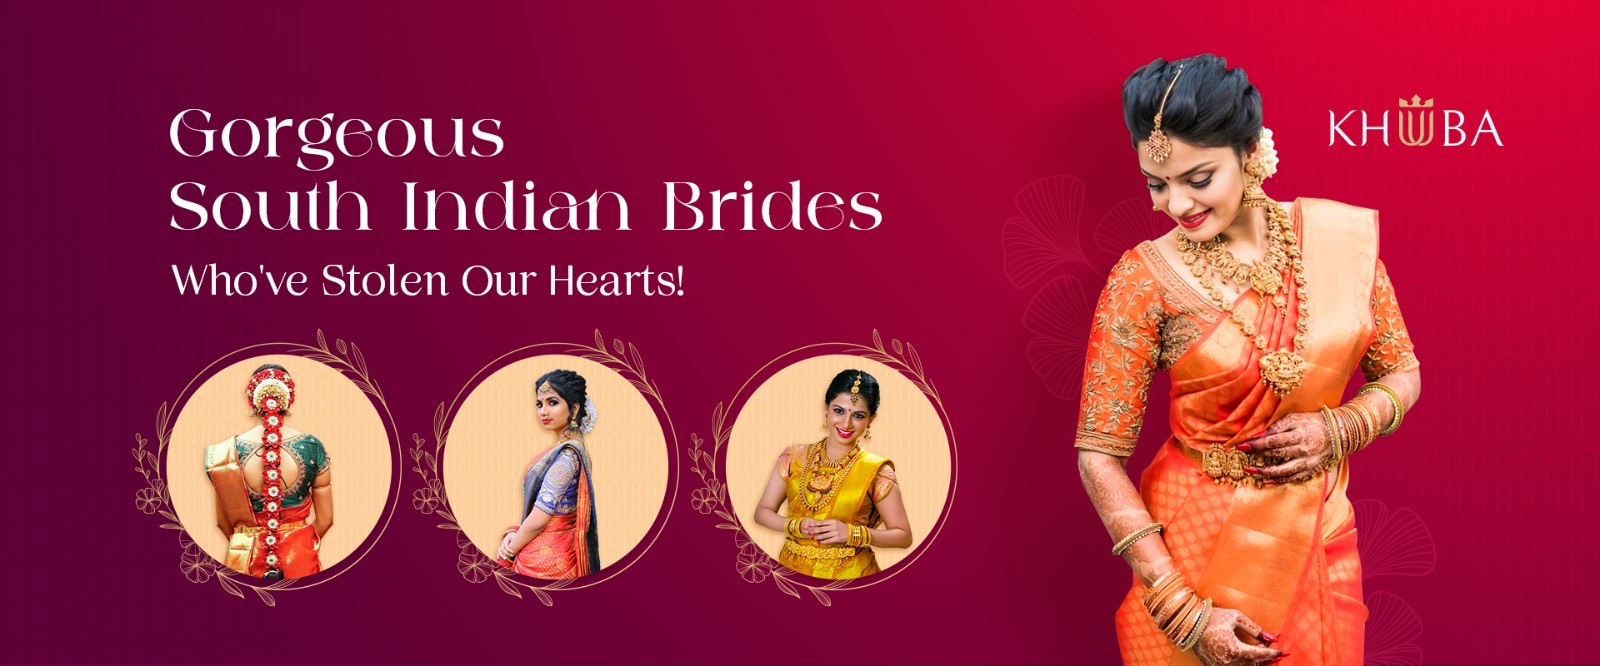 60+ Gorgeous South Indian Bridal Looks for a Timeless Wedding